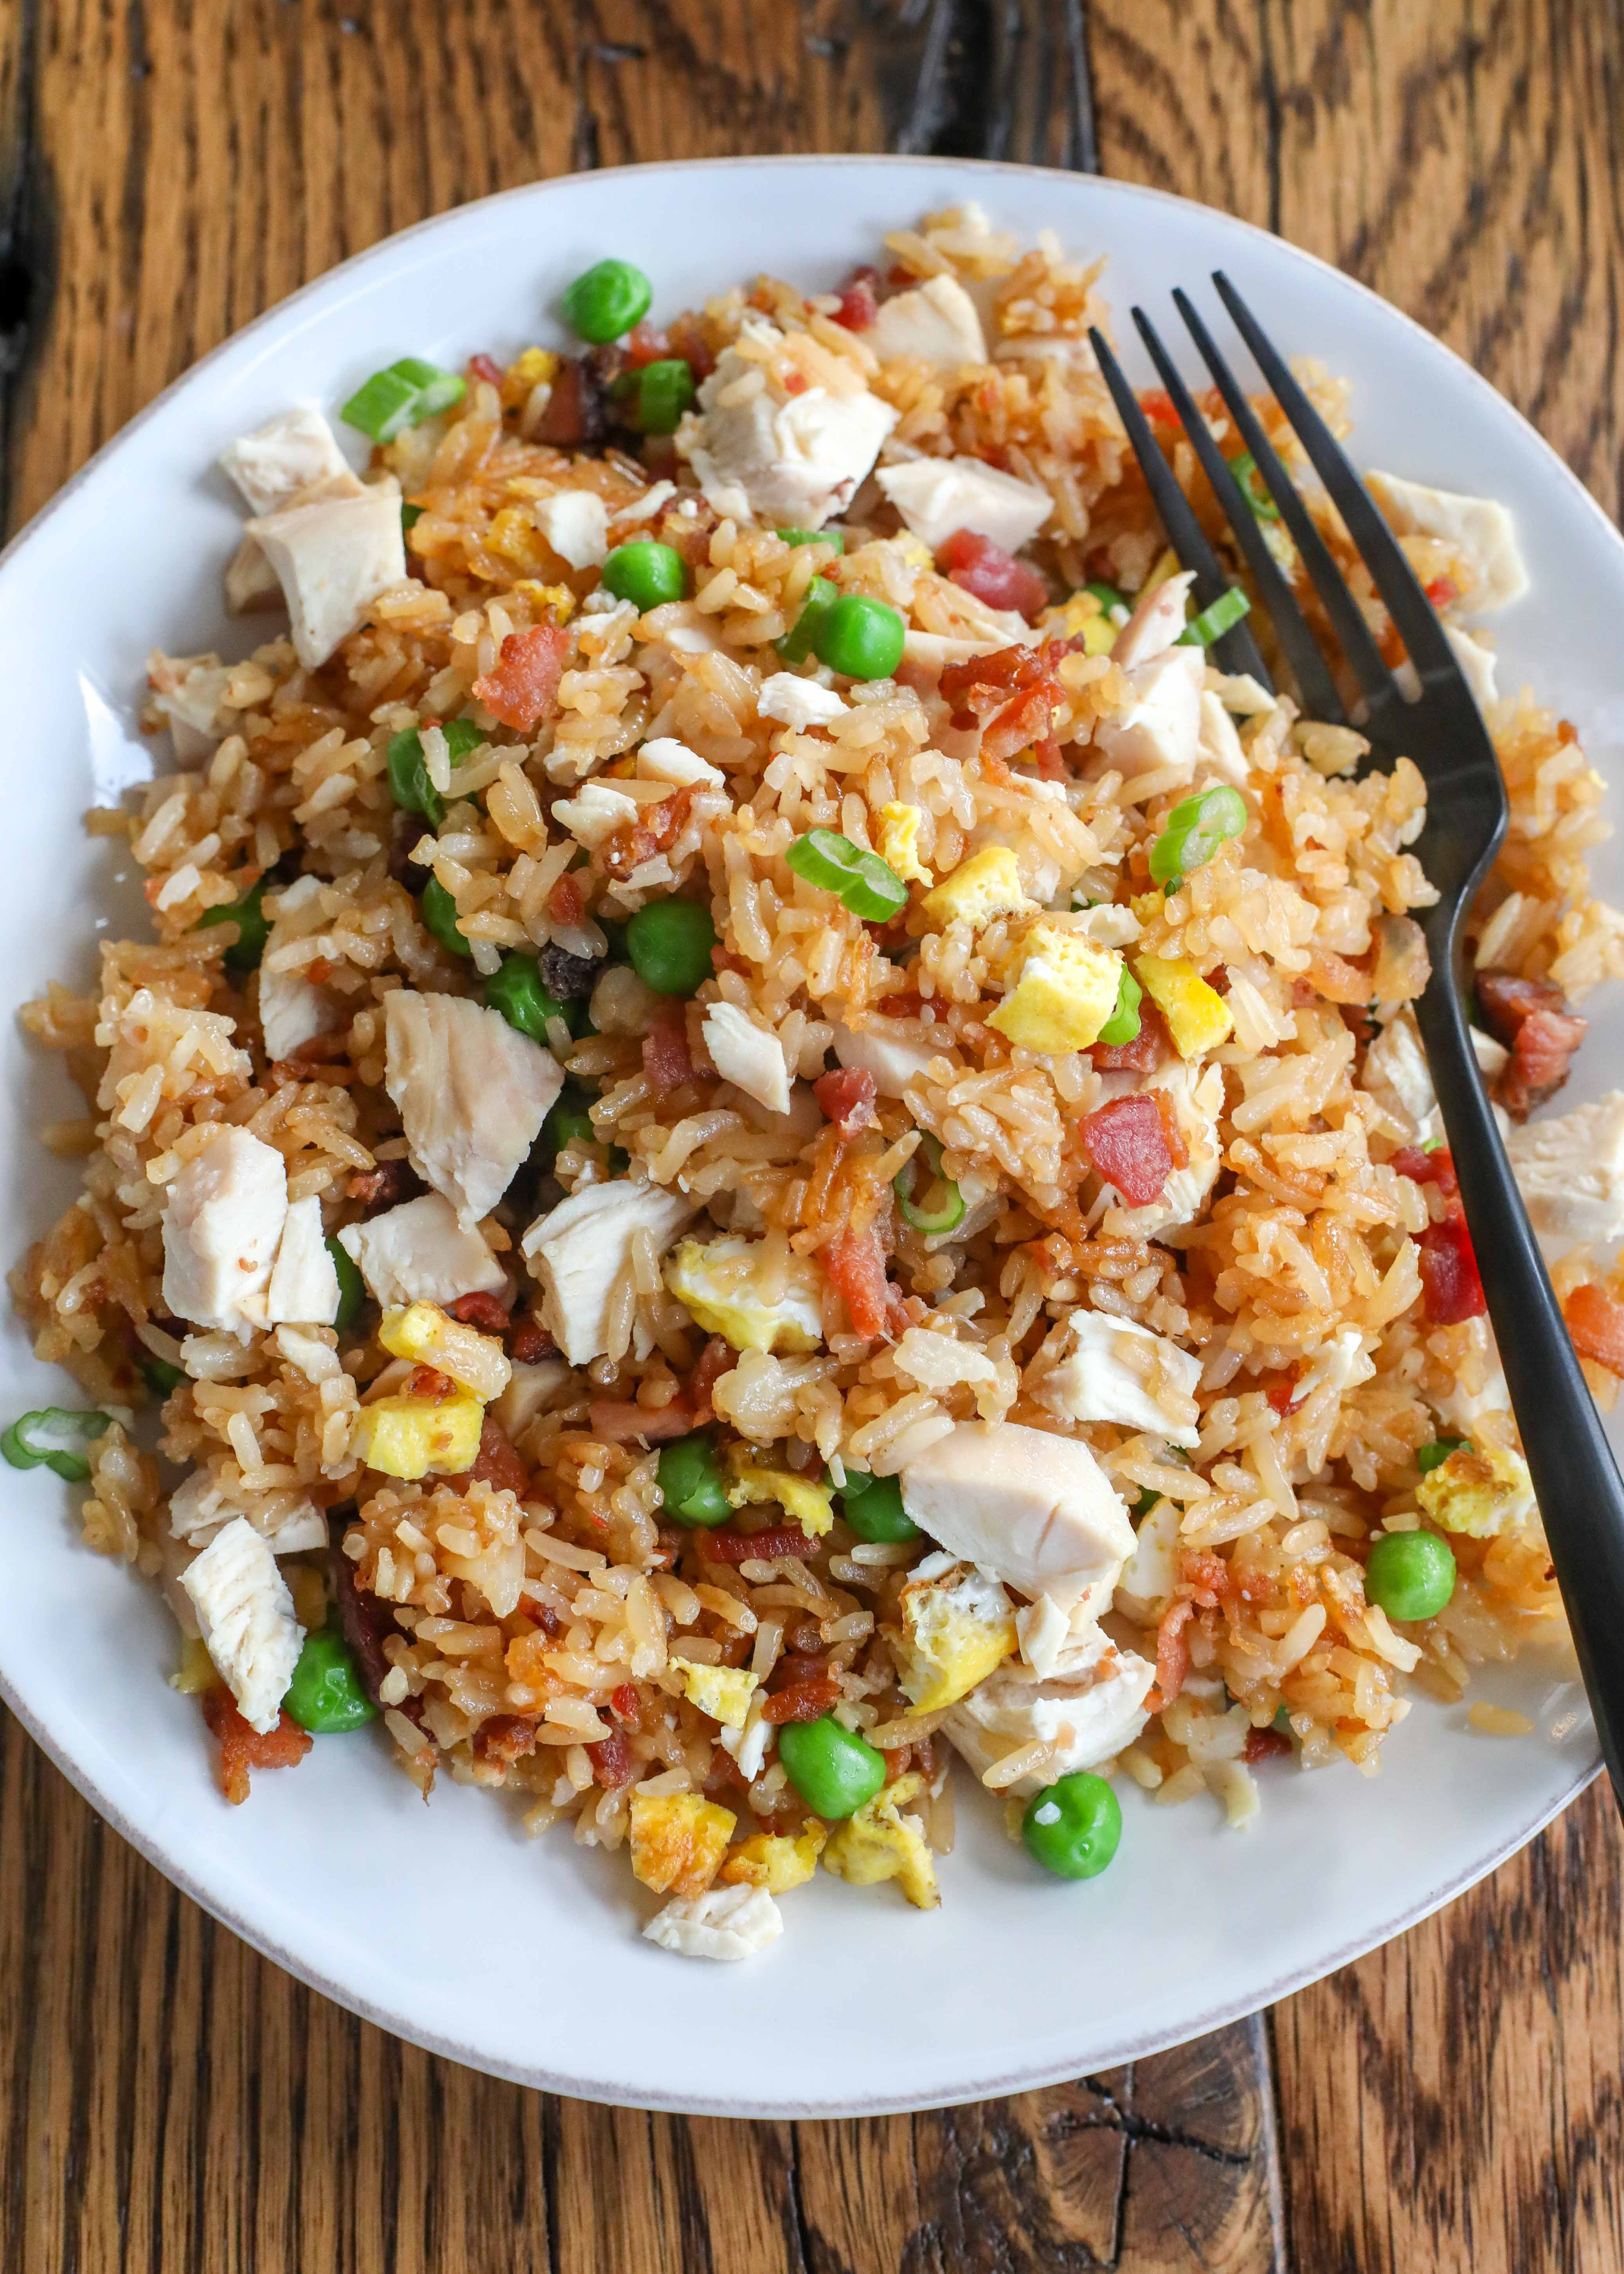 fried rice and fried chicken